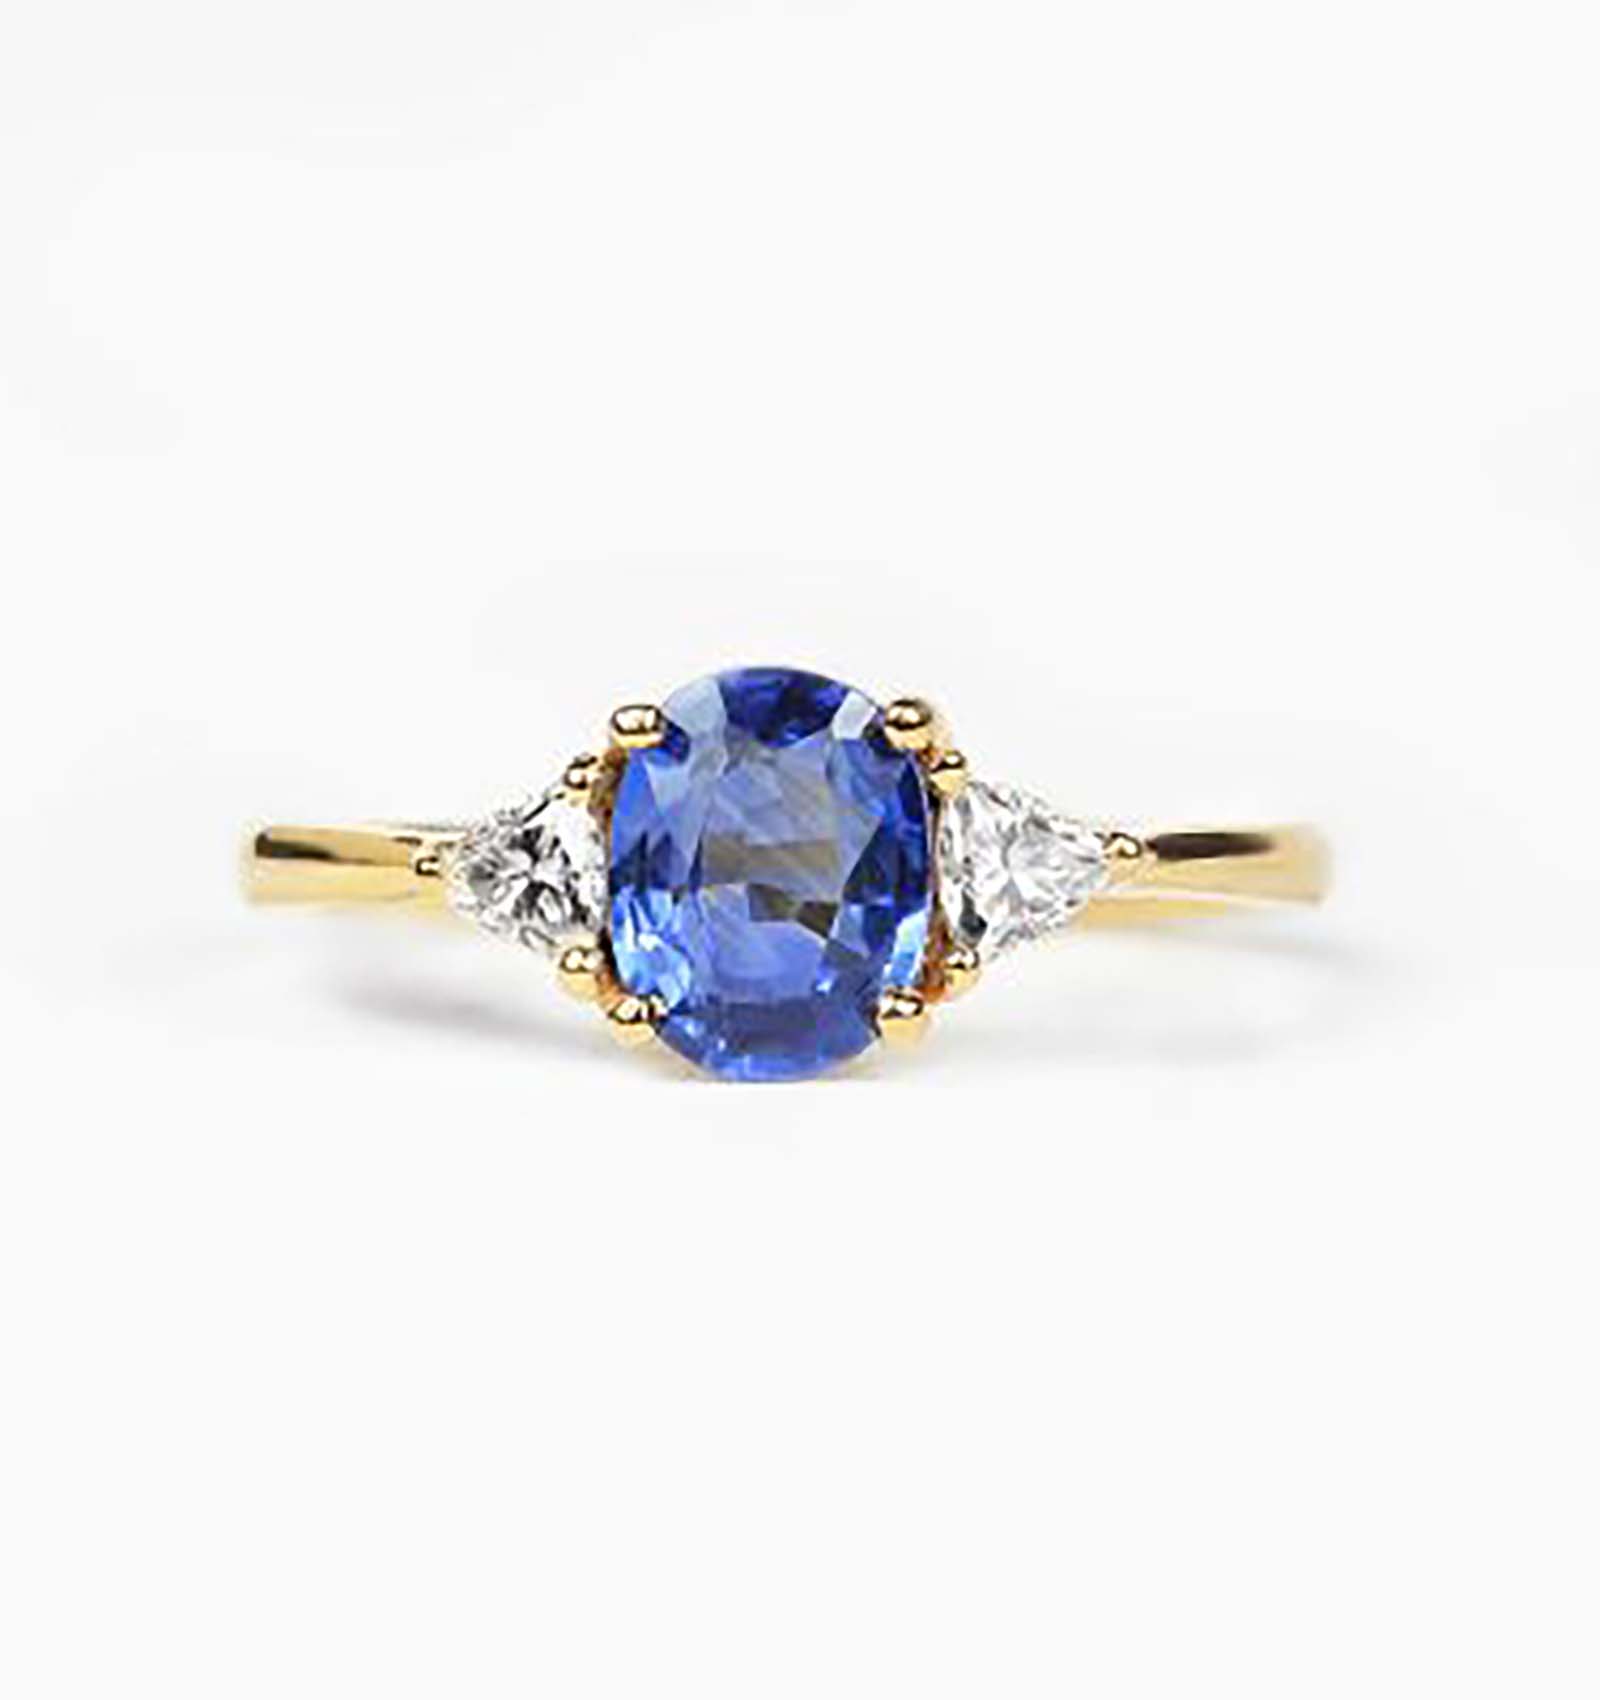 1.0 CT Oval Blue Sapphire Engagement Ring - Sapphire and Diamond Ring ...